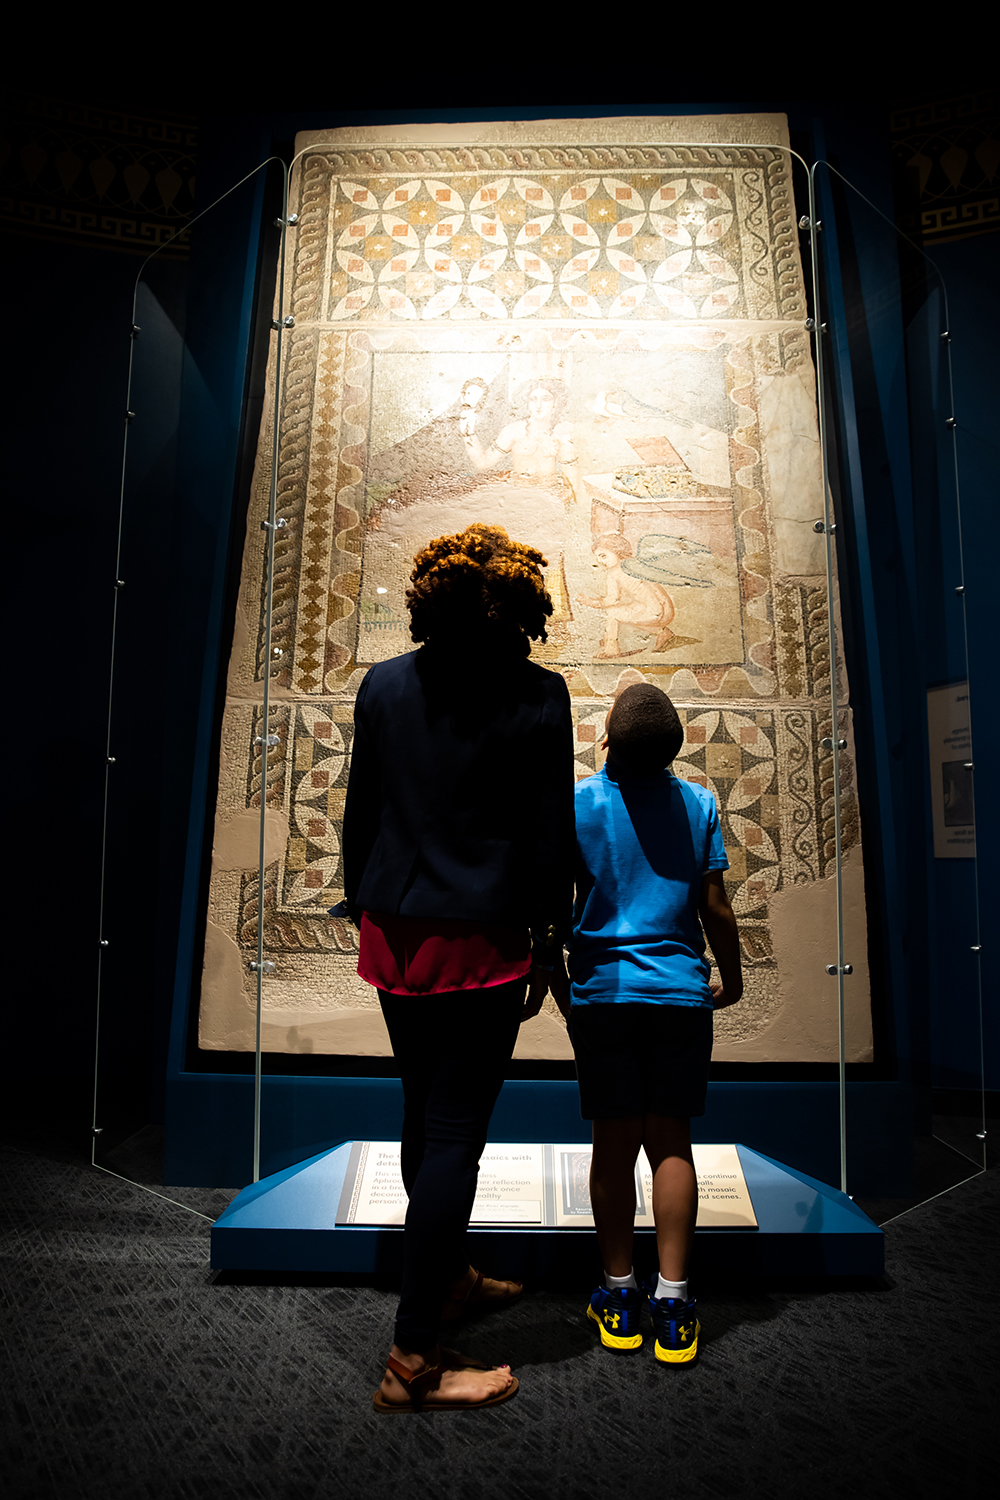 This beautiful mosaic is one of 150 ancient artifacts on display at The Children's Museum of Indianapolis as part of Treasures of Ancient Greece.